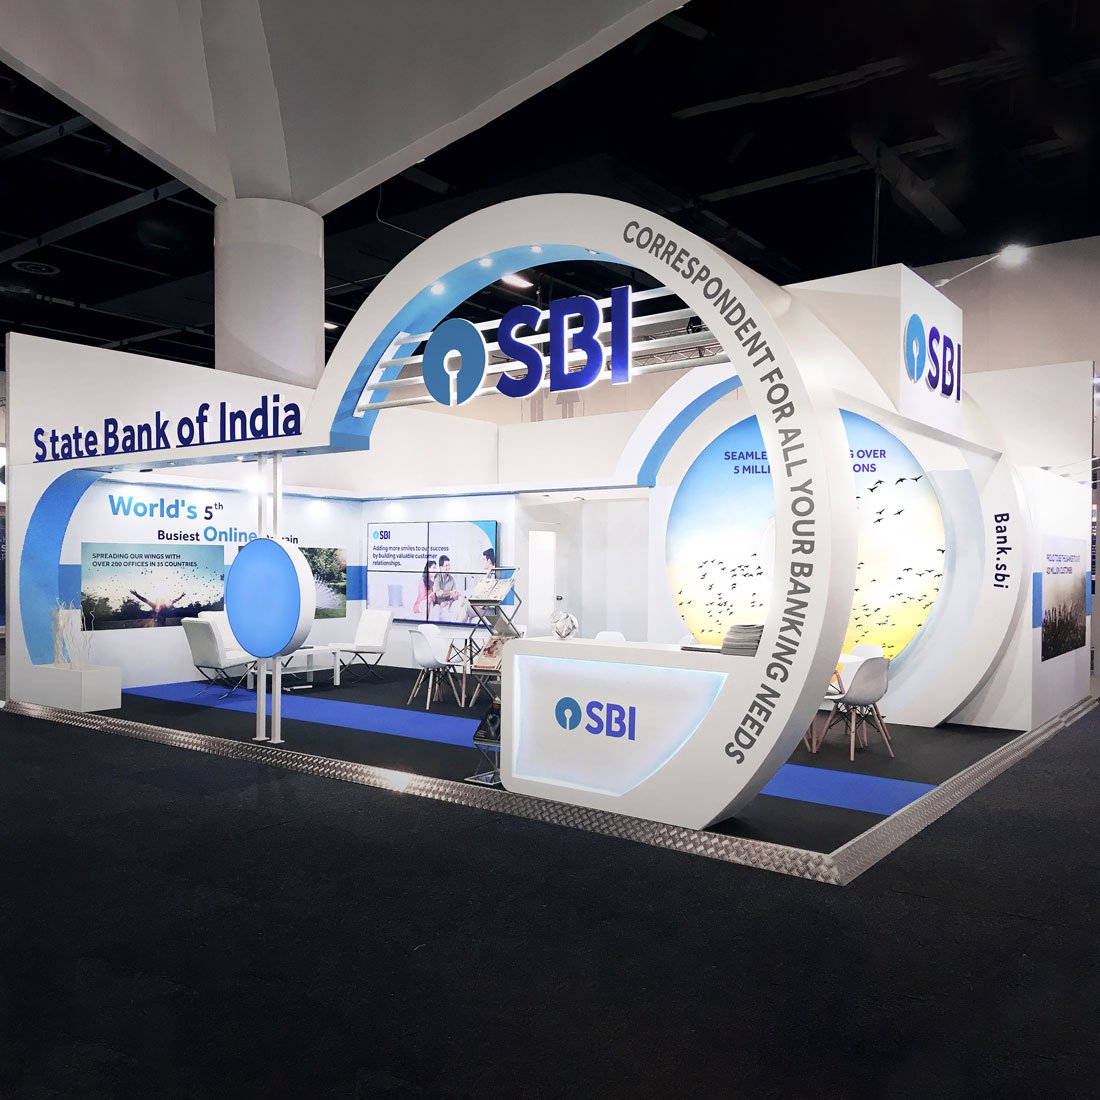 Custom stand exhibition stand type for SBI at Banking Expo 2018 in Sydney